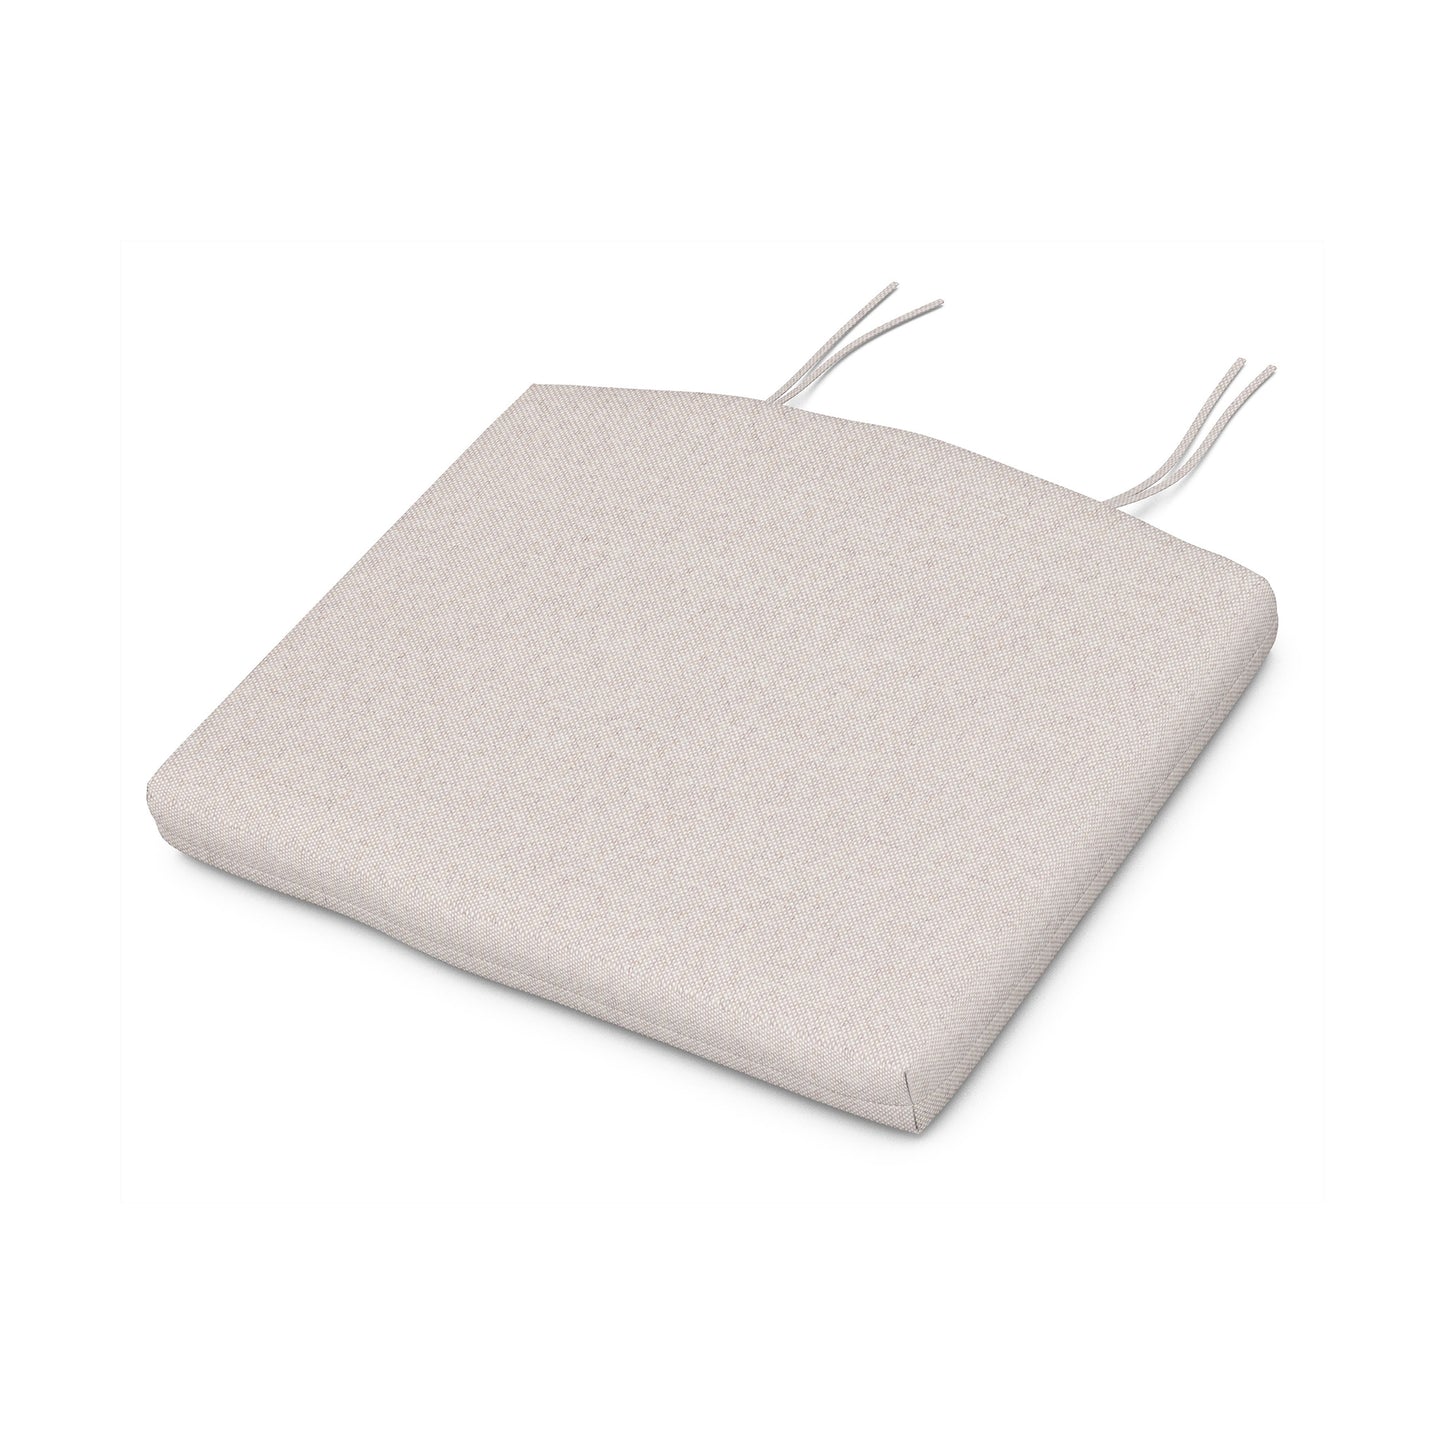 A square, light beige POLYWOOD® XPWS0003 seat cushion with two attached ties for securing it to a chair, displayed on a white background.